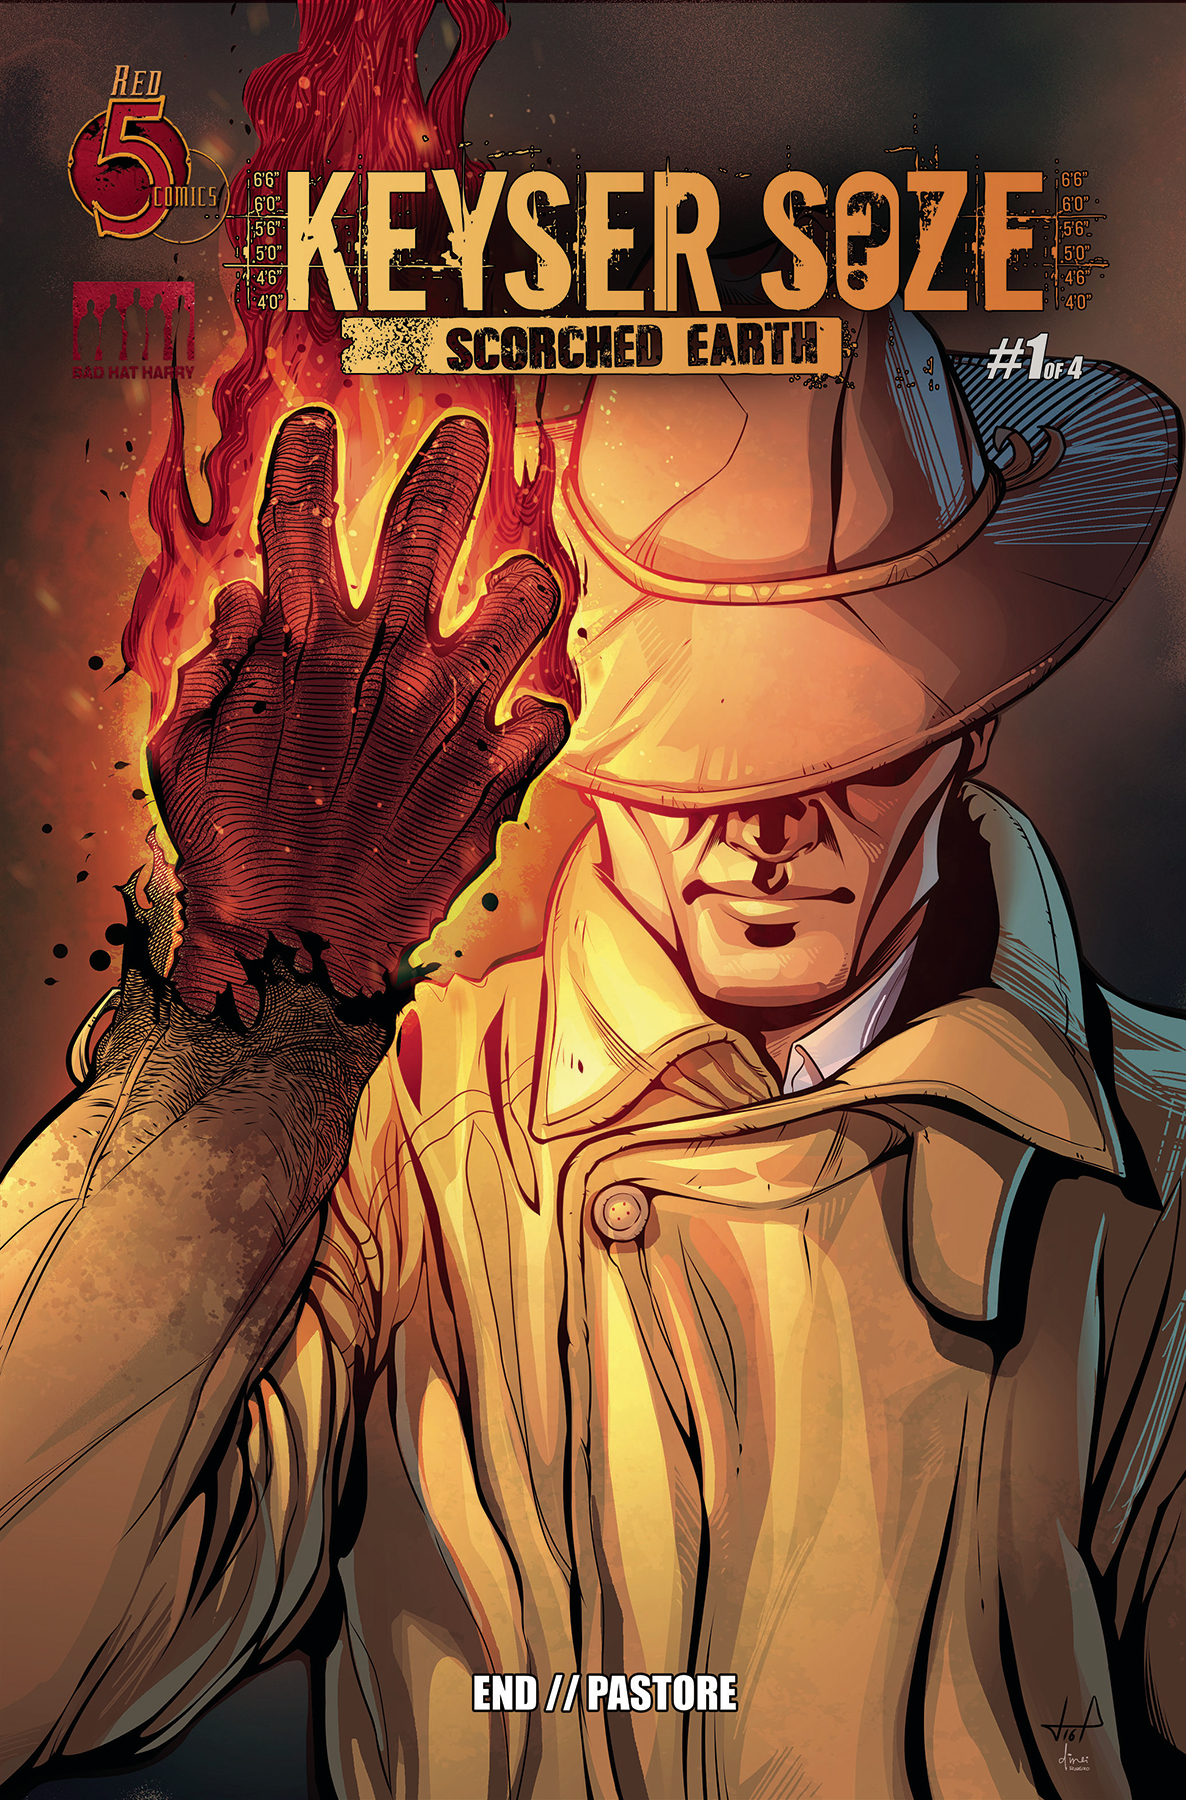 MAR171989 - KEYSER SOZE SCORCHED EARTH #1 (OF 5) - Previews World